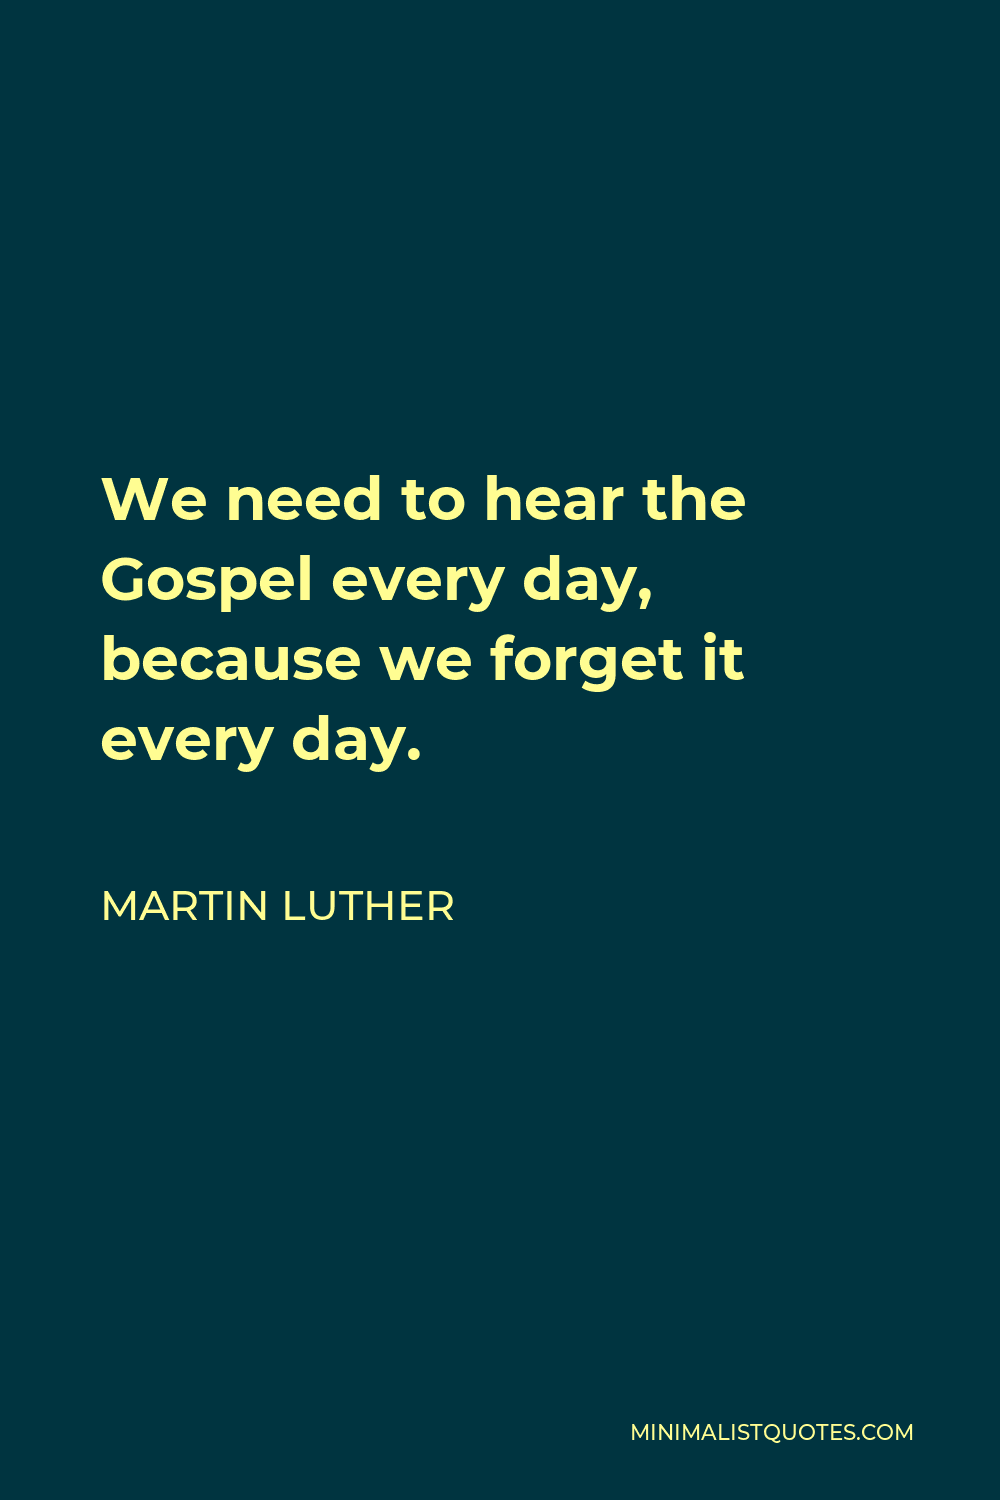 Martin Luther Quote - We need to hear the Gospel every day, because we forget it every day.